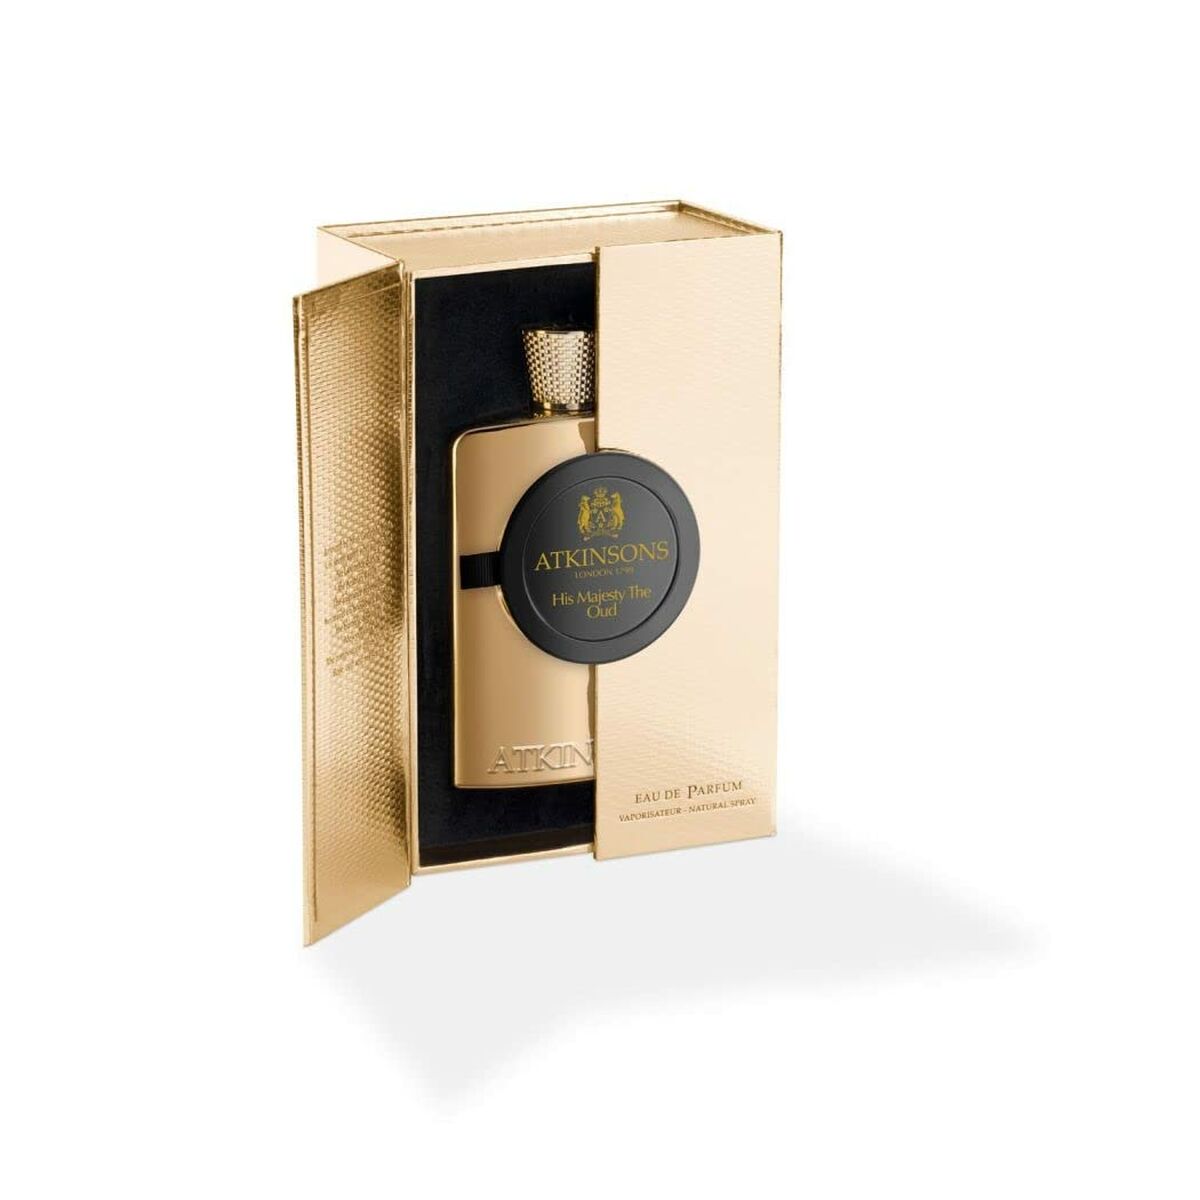 Herenparfum Atkinsons EDP His Majesty The Oud 100 ml